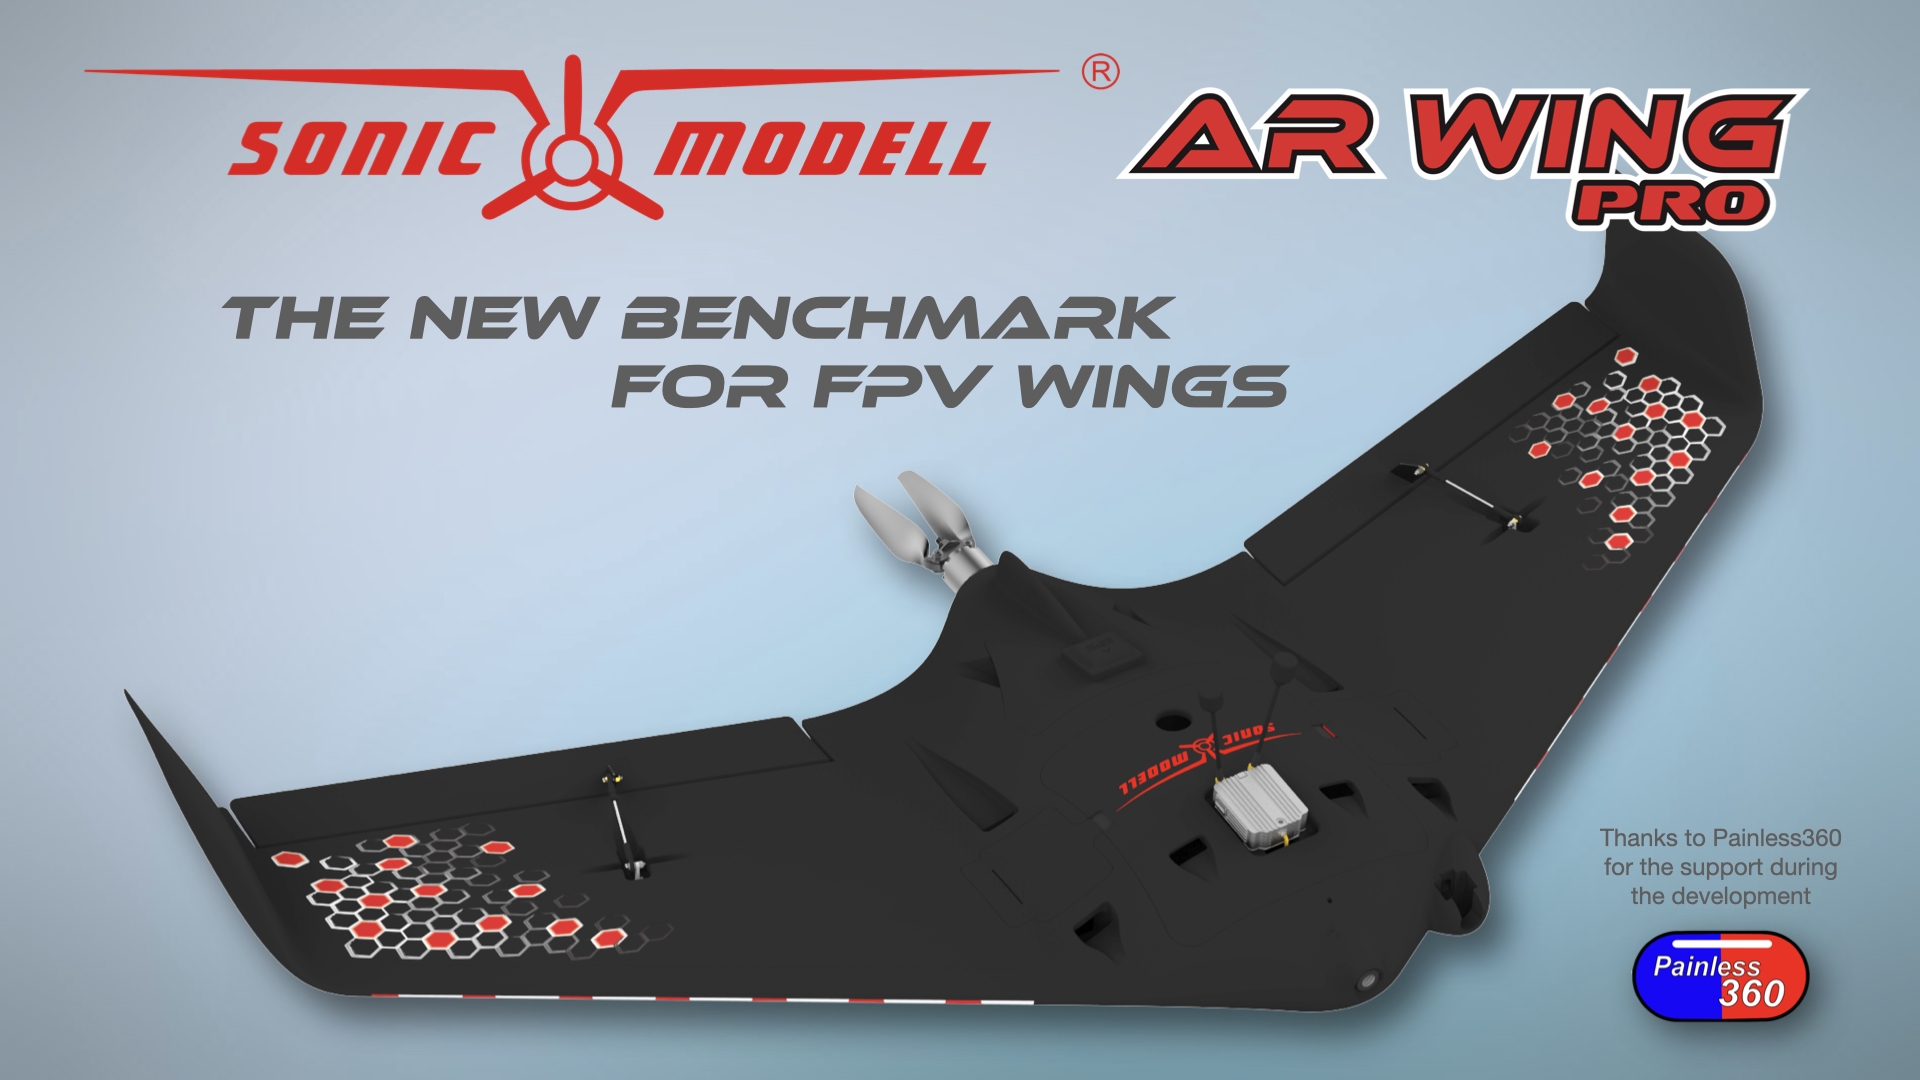 Sonicmodell AR Wing Pro 1000mm Wingspan EPP FPV Flying Wing RC Airplane